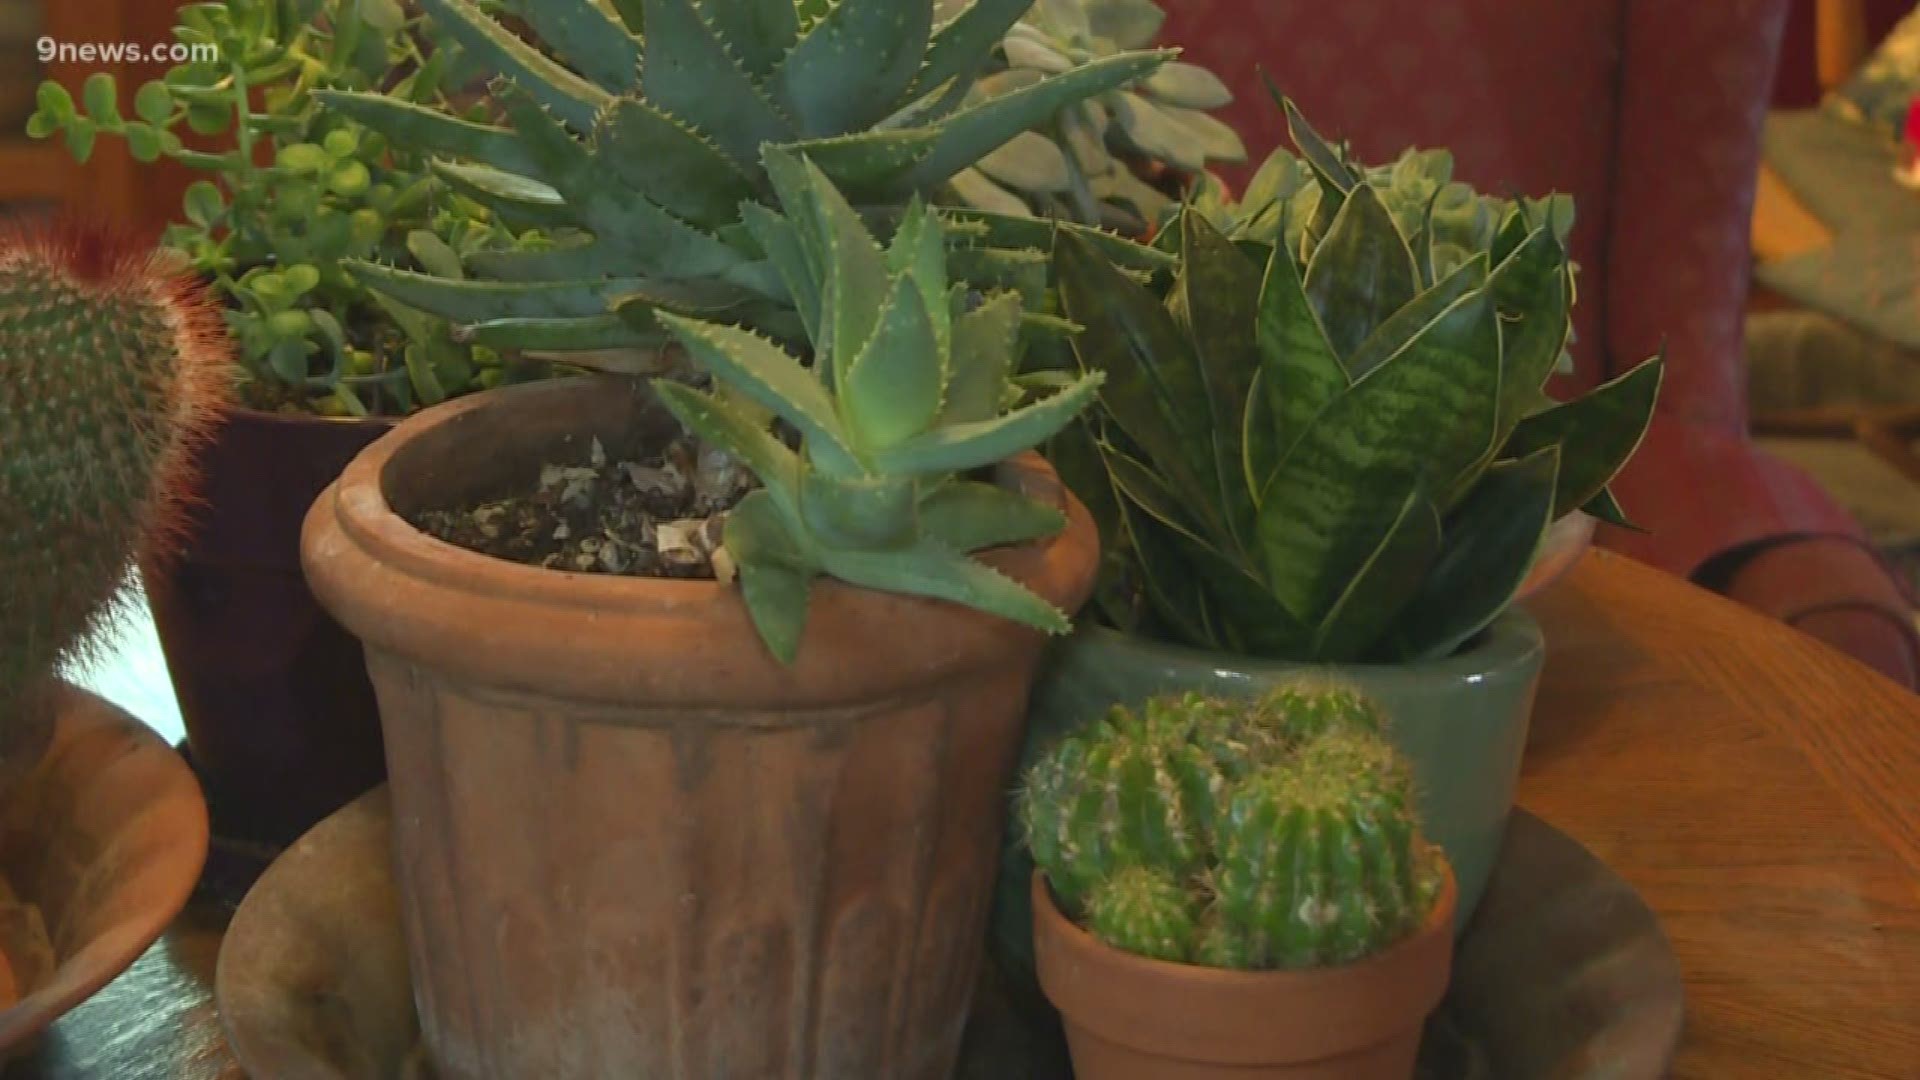 The succulent craze continues. These desert plants, including cactus, need only bright light and benign neglect to thrive.